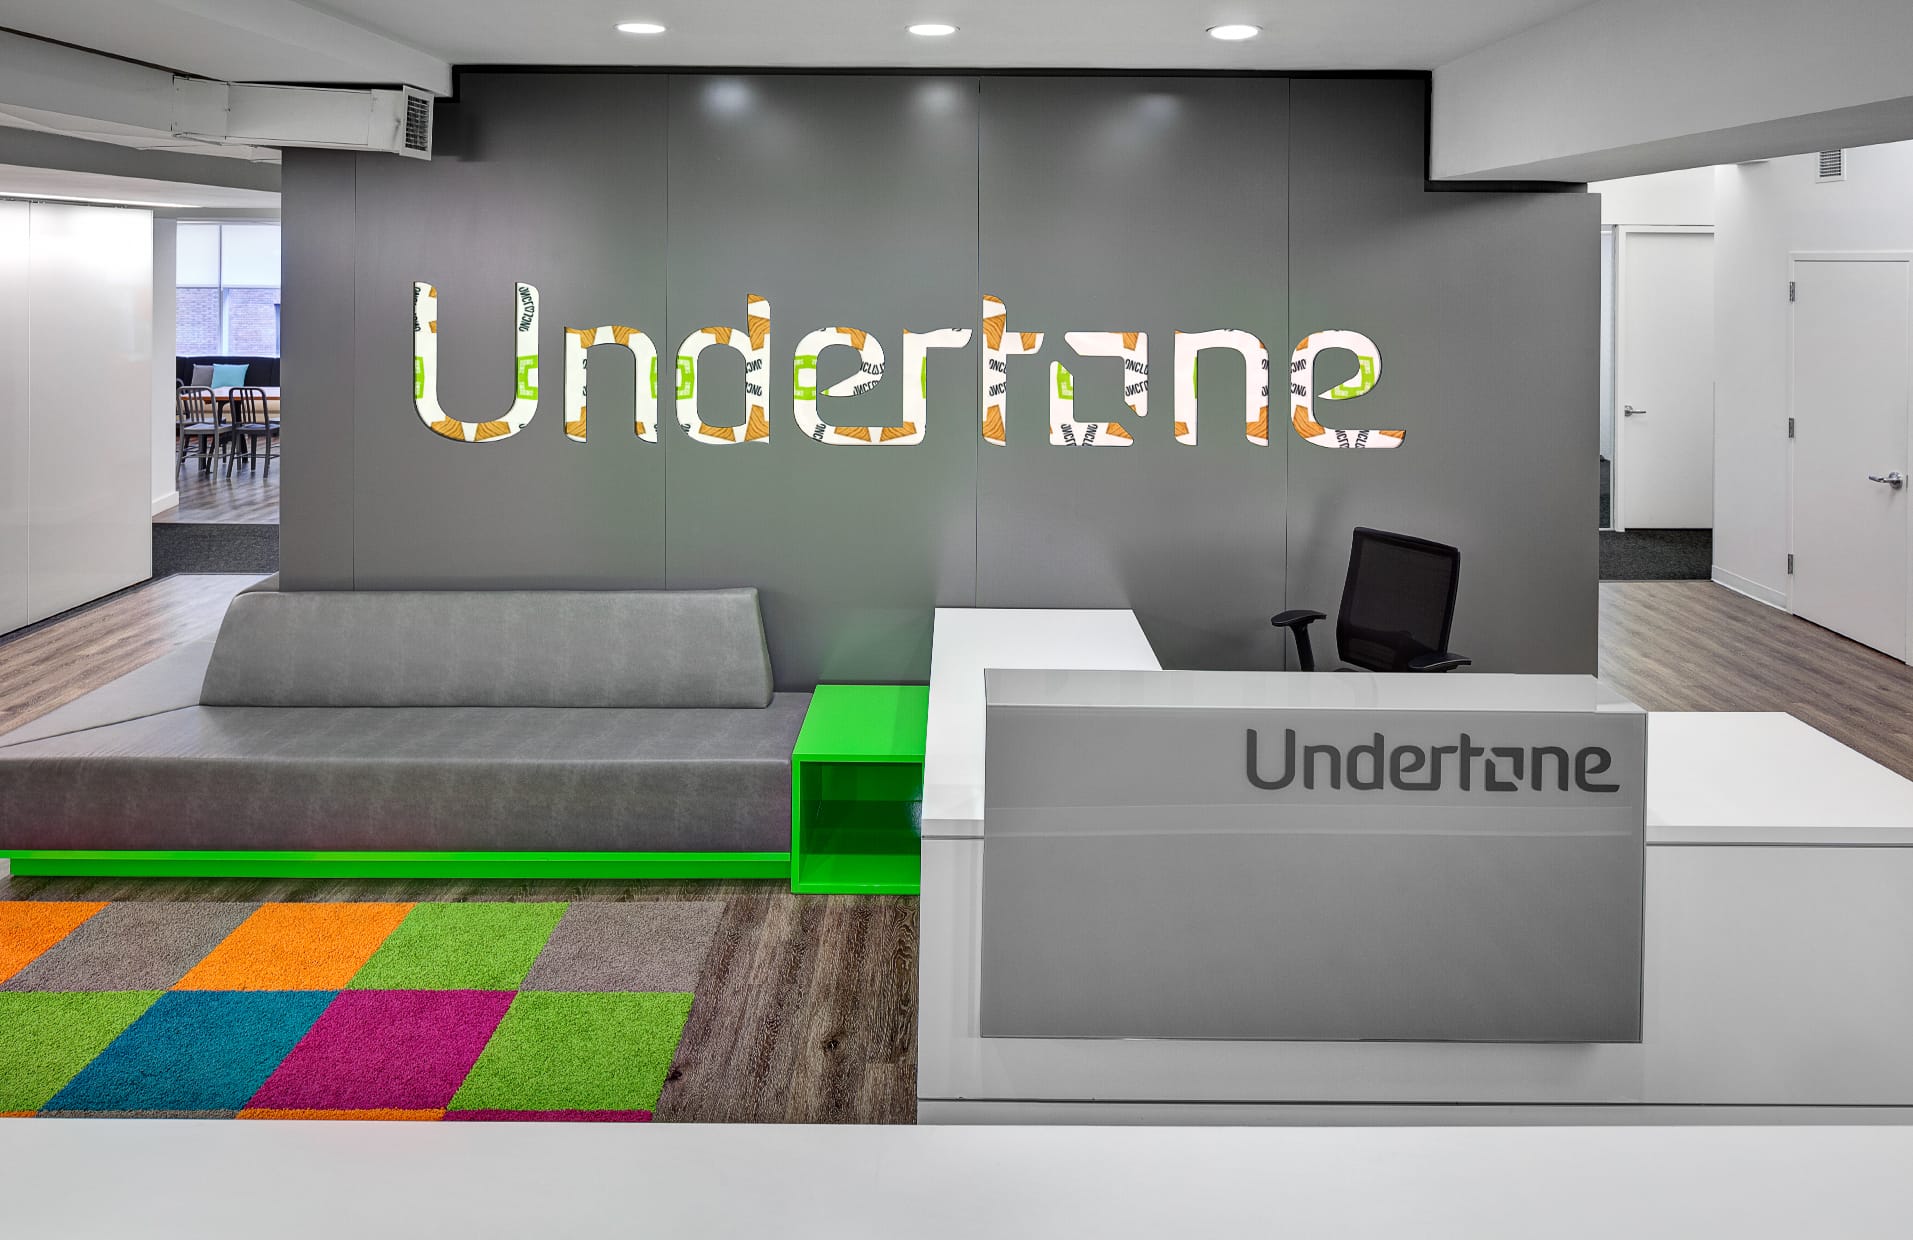 Large illuminated and typographic wall treatment for Undertone Headquarters workspace.